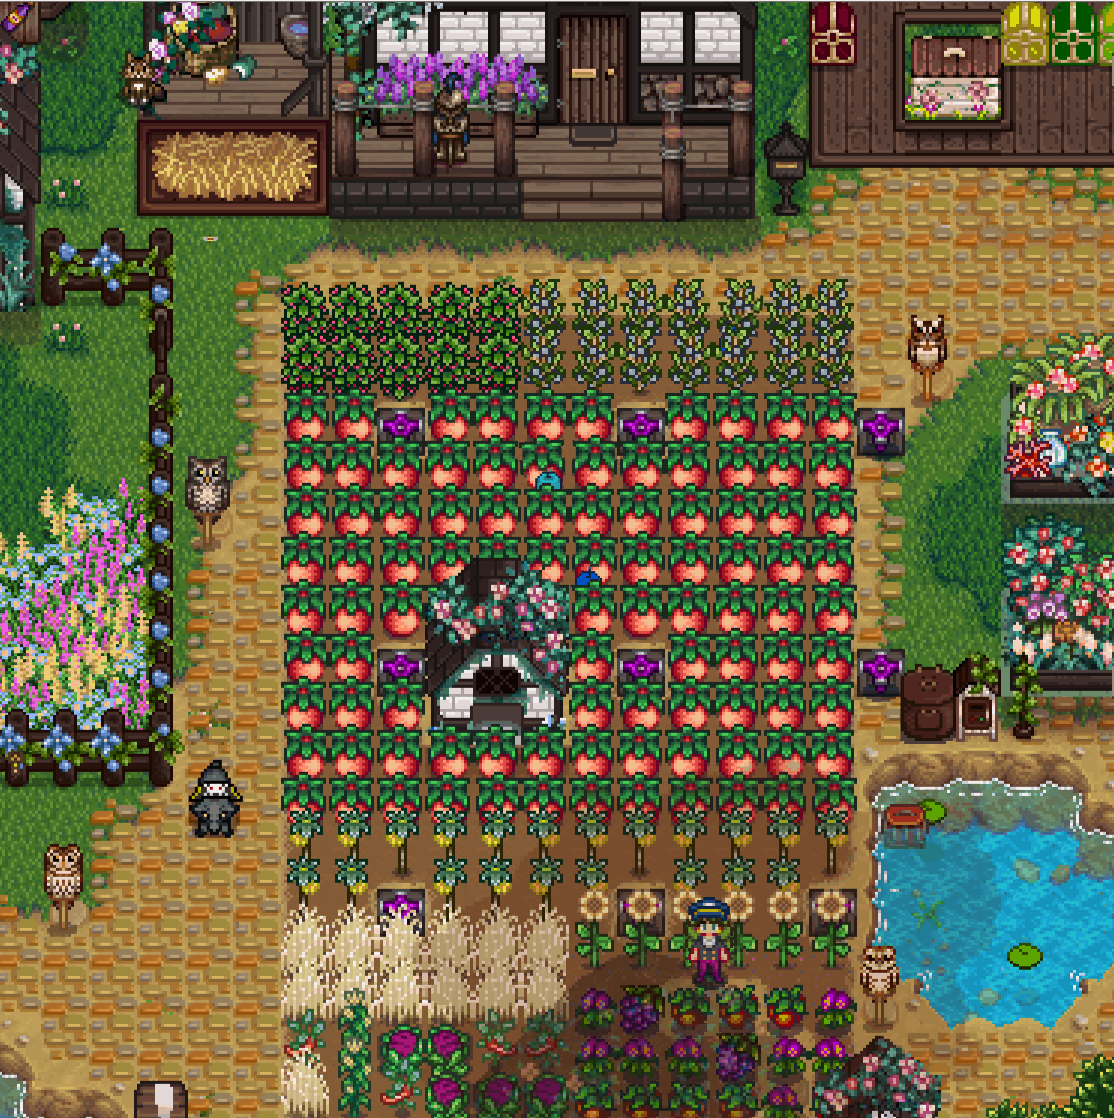 Fwippy’s Subdued Summer Crop Recolor Stardew Valley Mod Download Free.